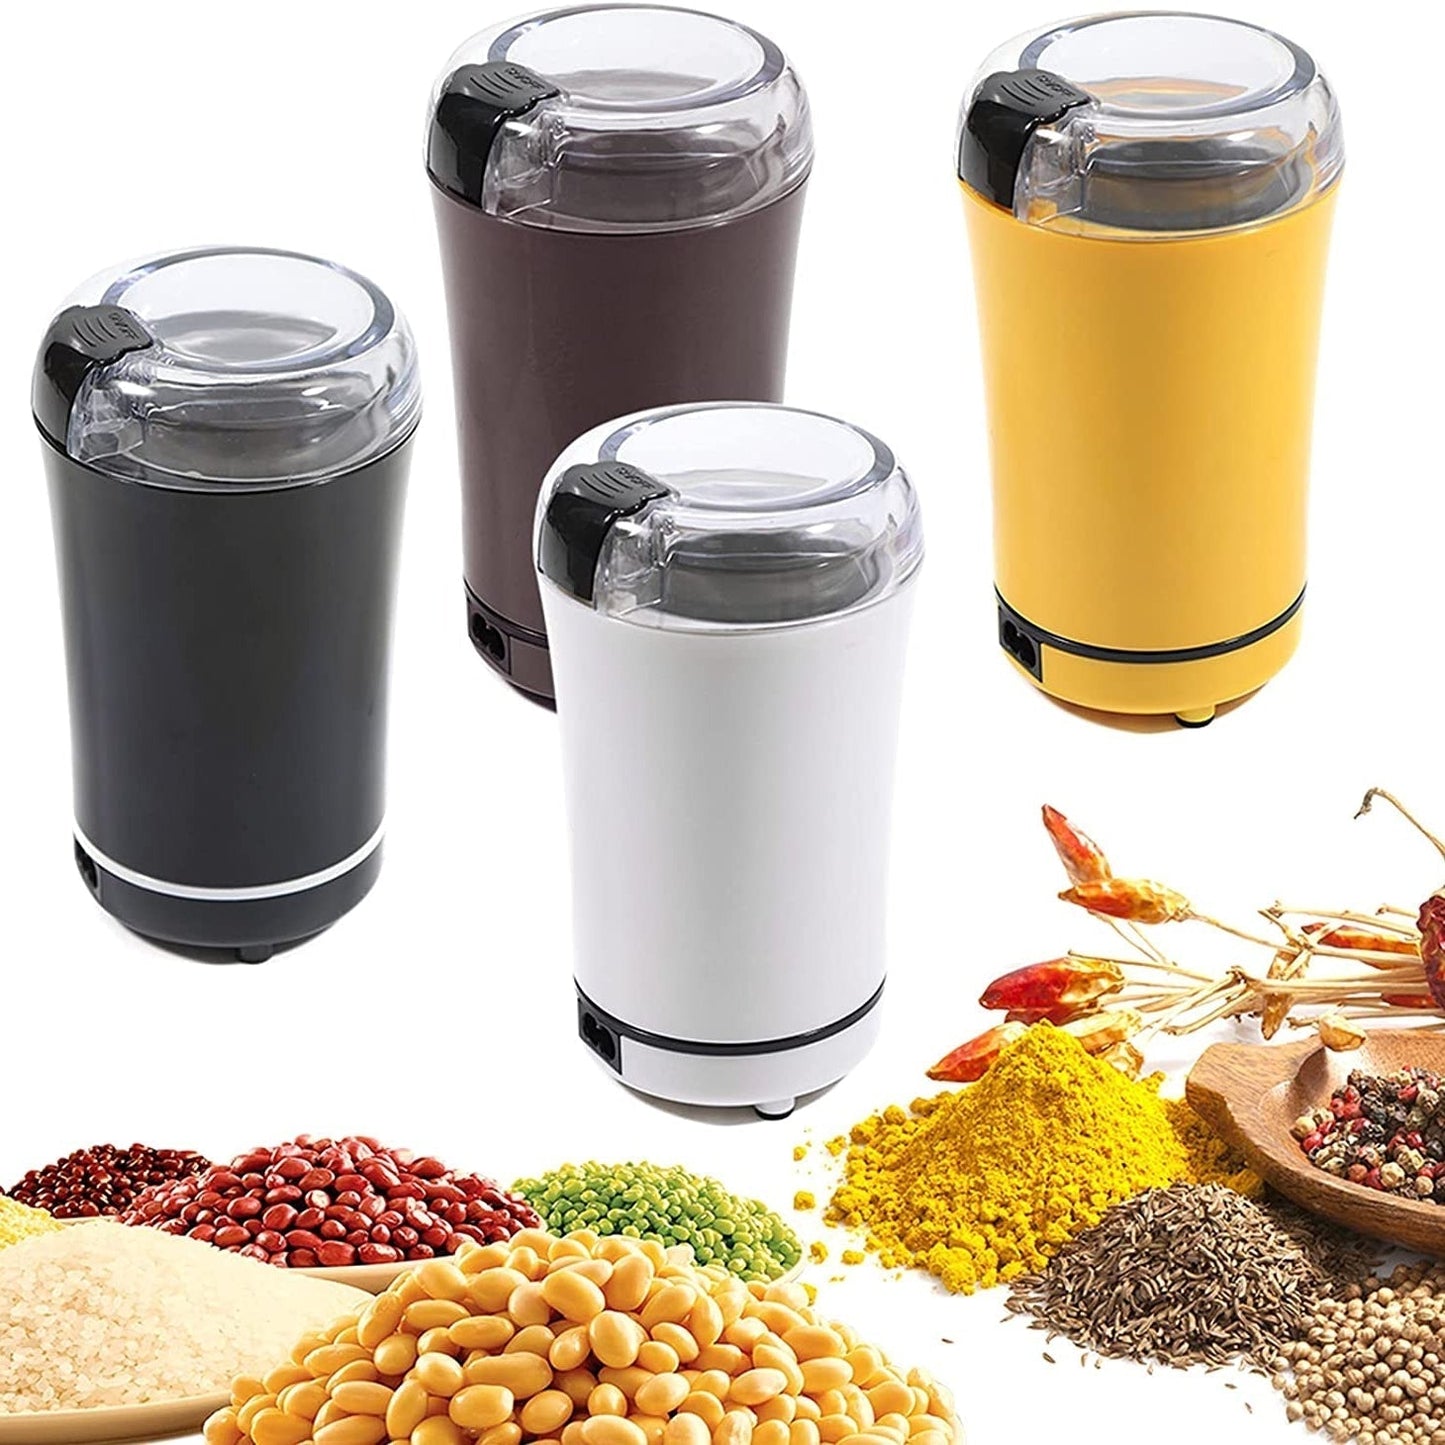 Portable Electric Coffee Bean and Spice Grinder